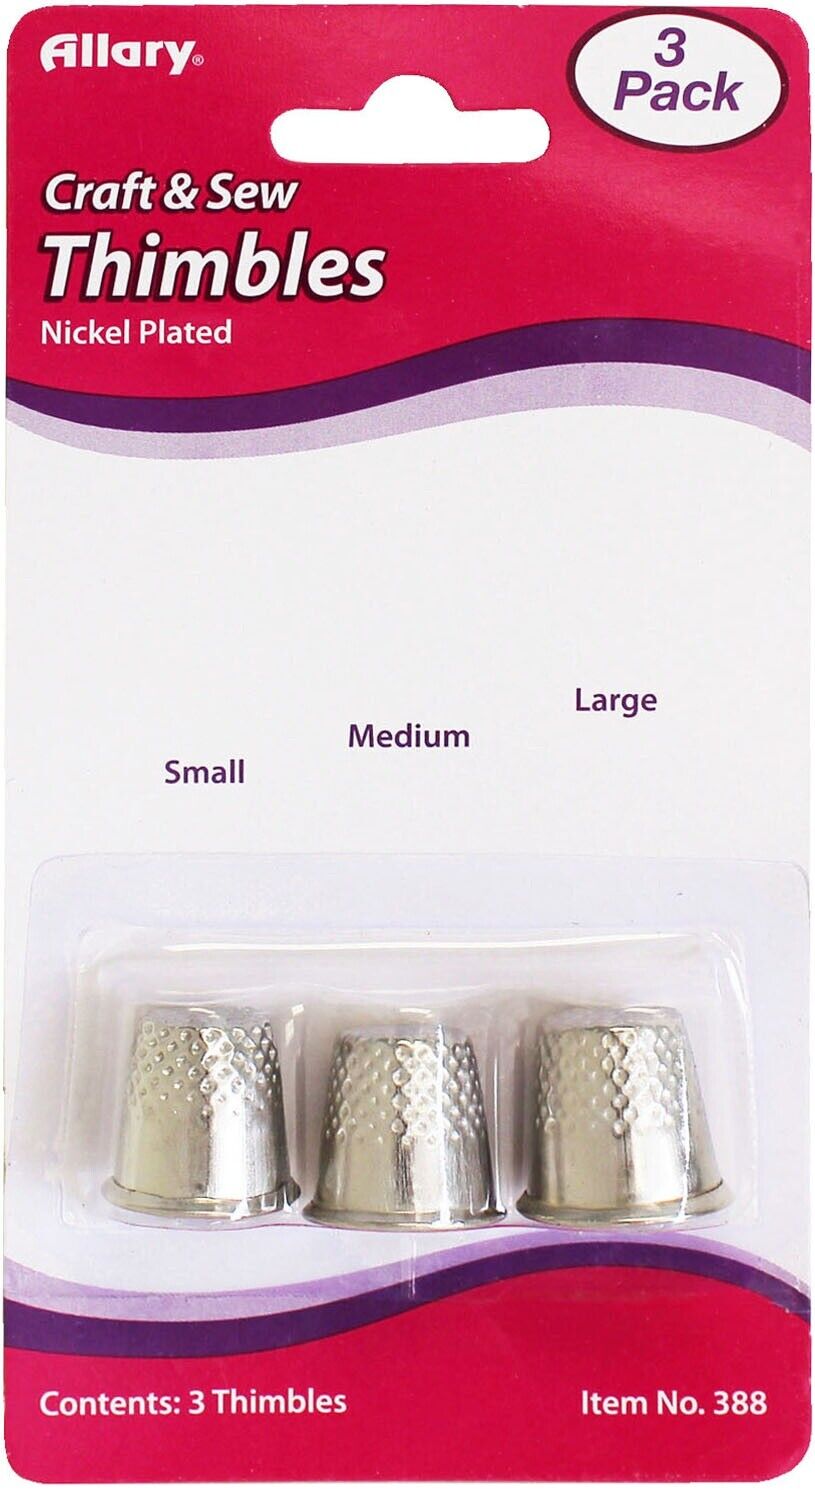 Allary Thimbles 3/pkg-assorted Sizes, 3 Pack